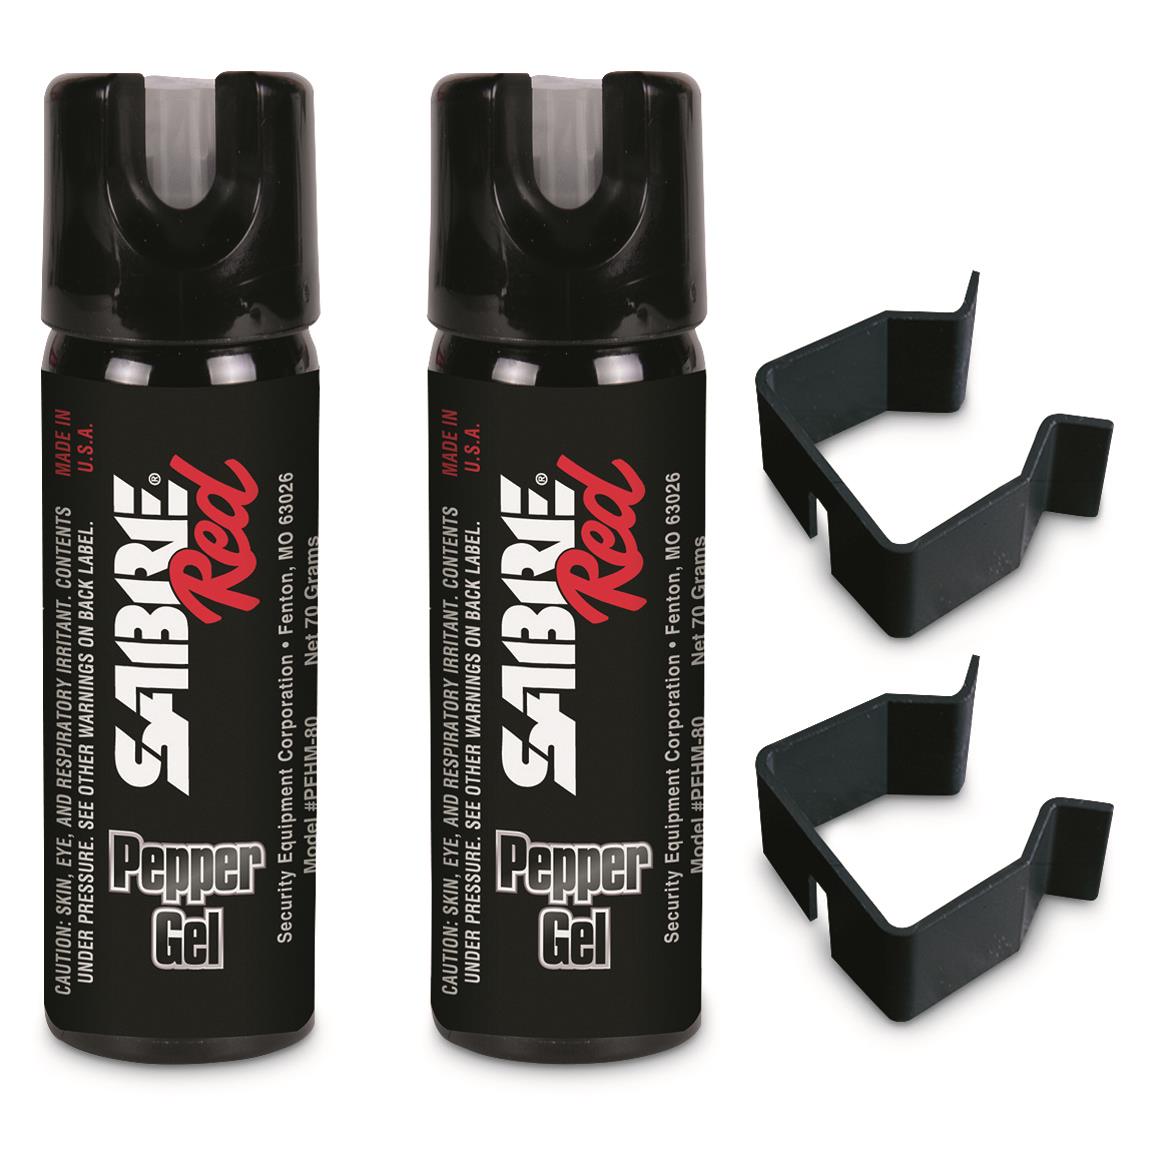 Sabre Red Pepper Gel Home Protection Kit, 2 Pack